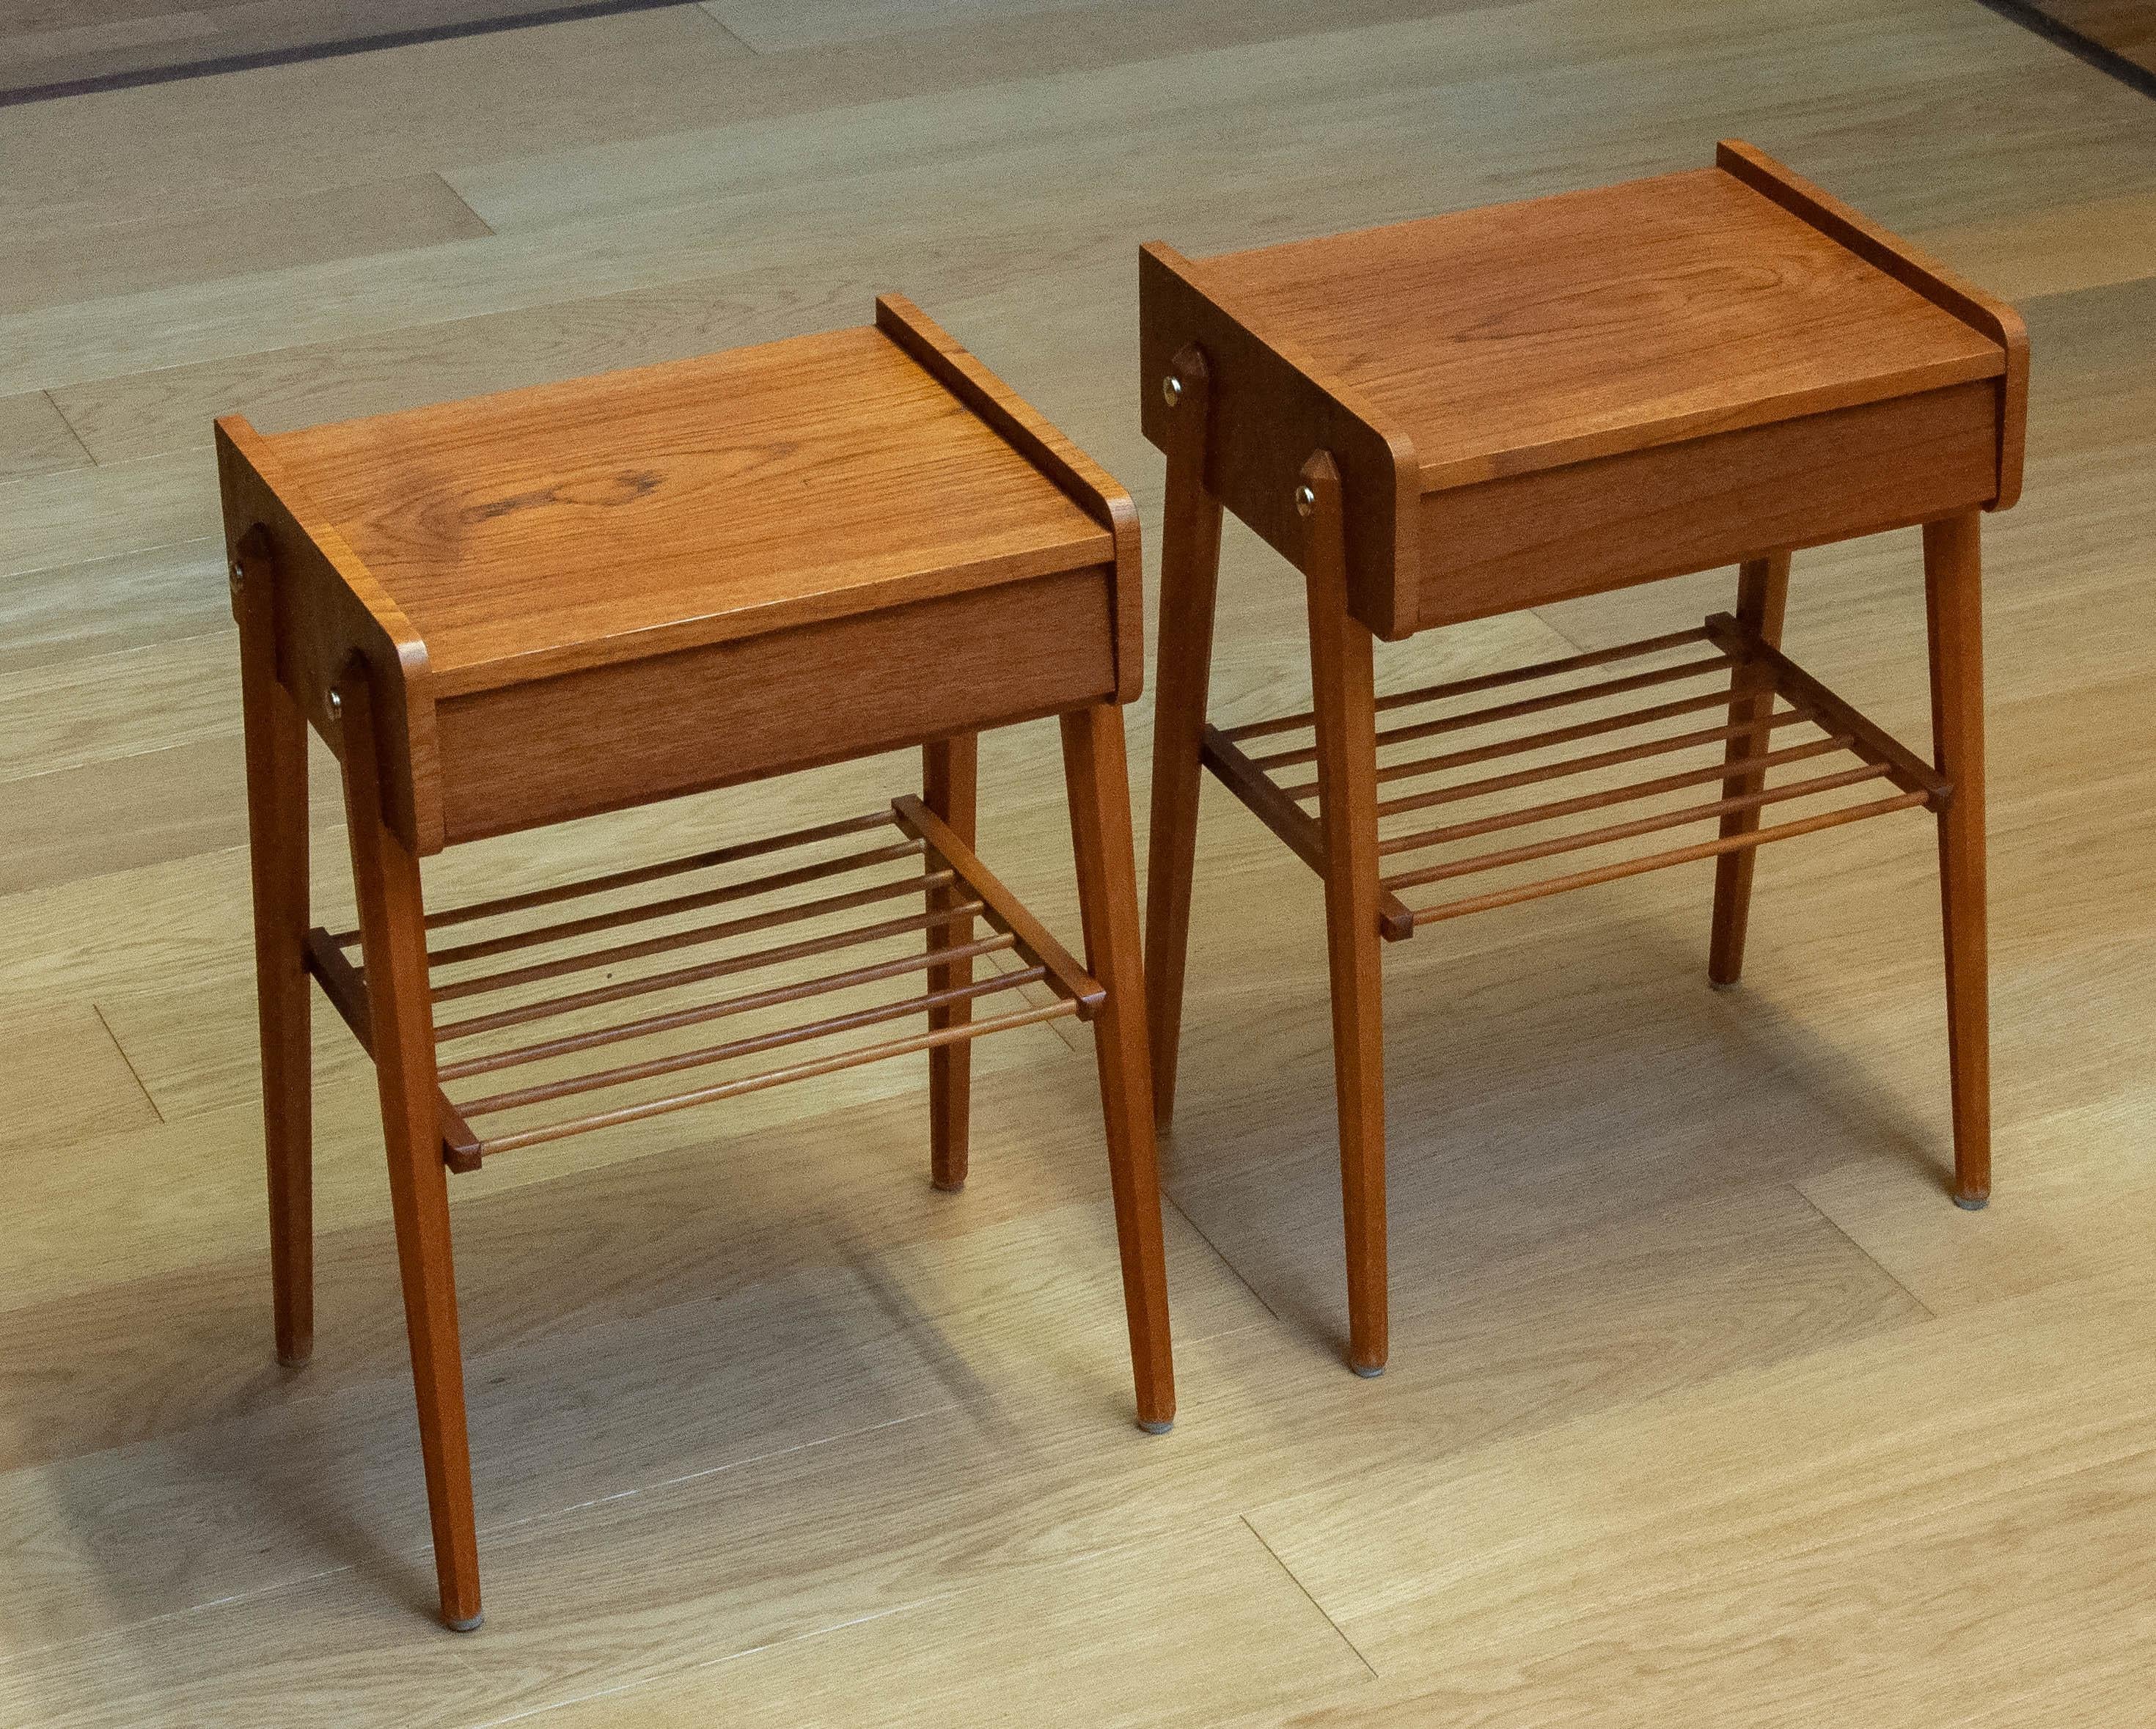 Mid-Century Modern 1950s Pair Swedish Night Stands / Bed side Tables By AB Bjärni Made Of Teak